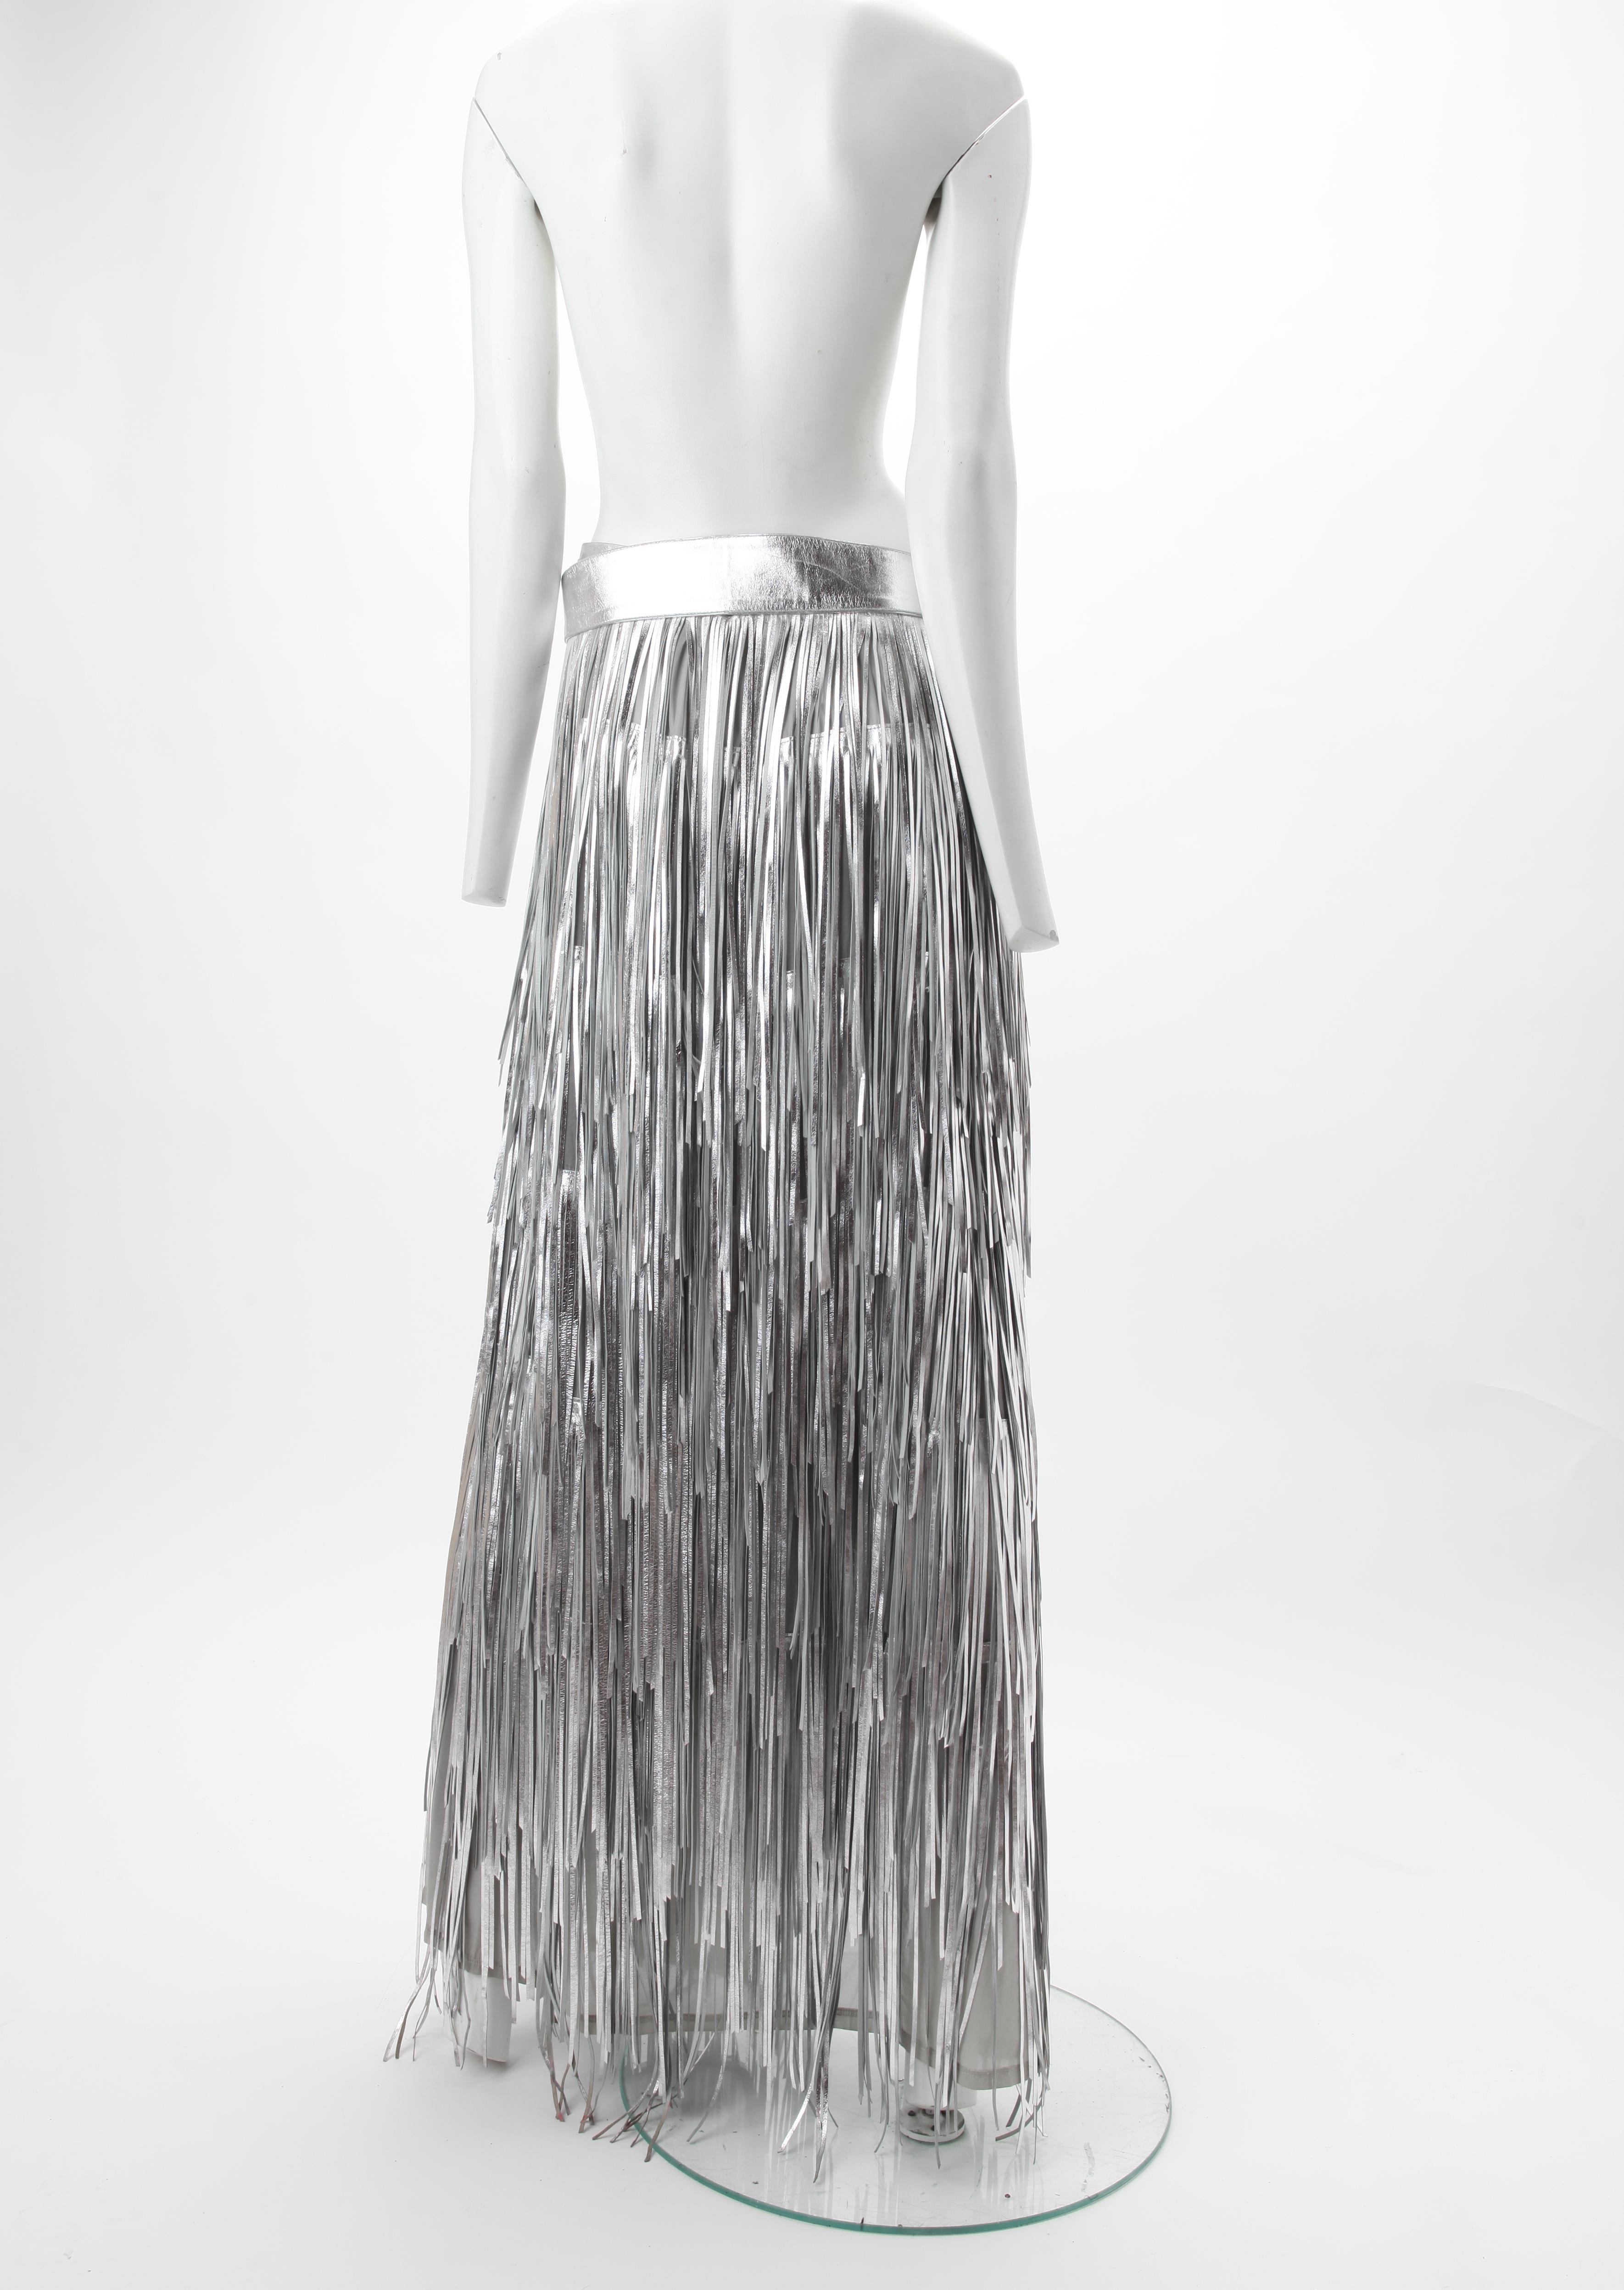 c.1980s Silver Leather Fringe Maxi Skirt Western In Good Condition For Sale In New York, NY